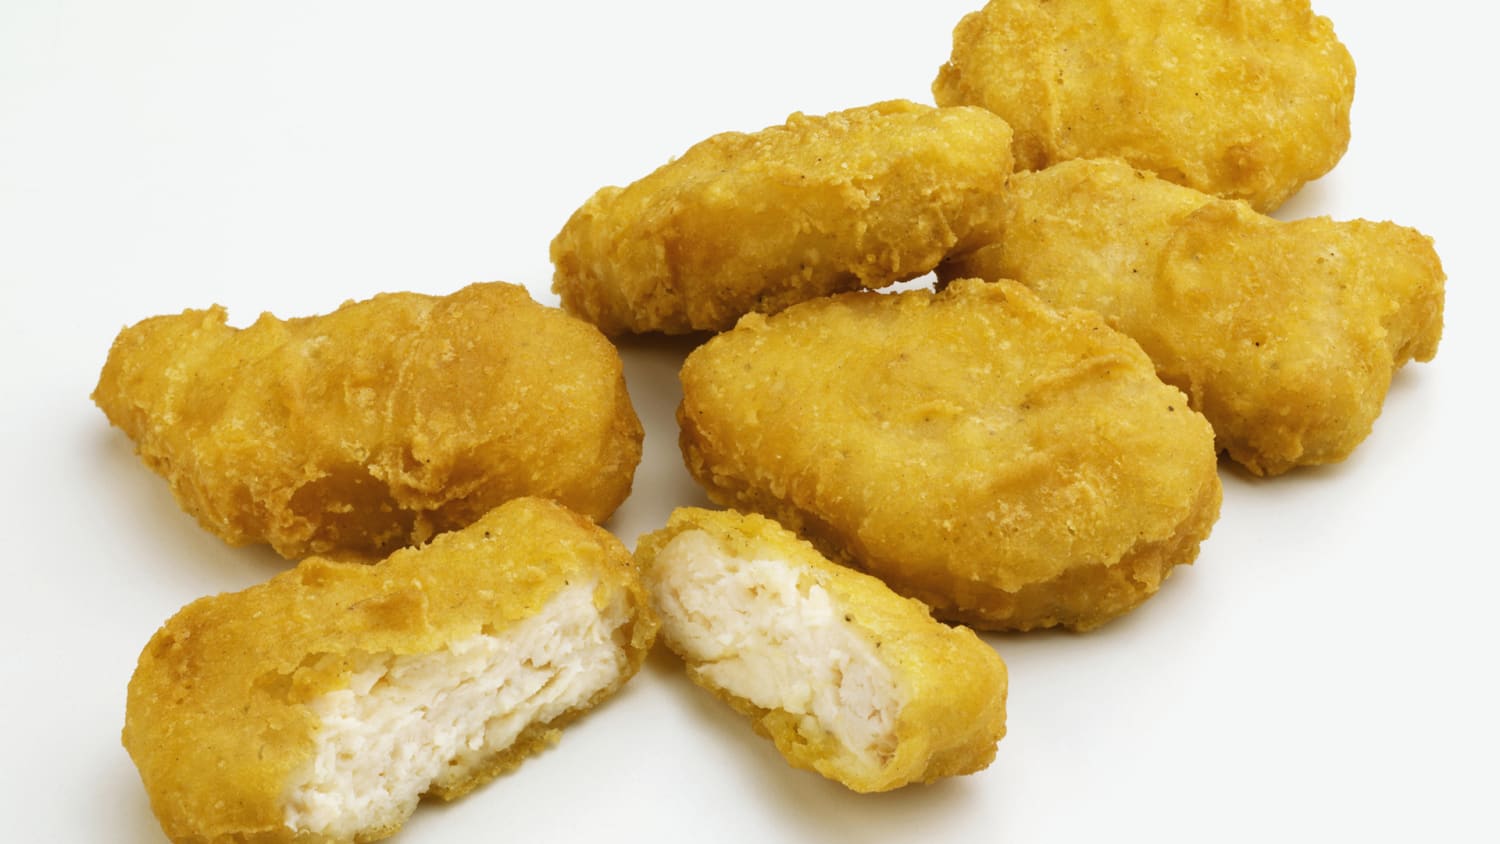 As you can see, these chicken nuggets are simply amazing and should be trea...